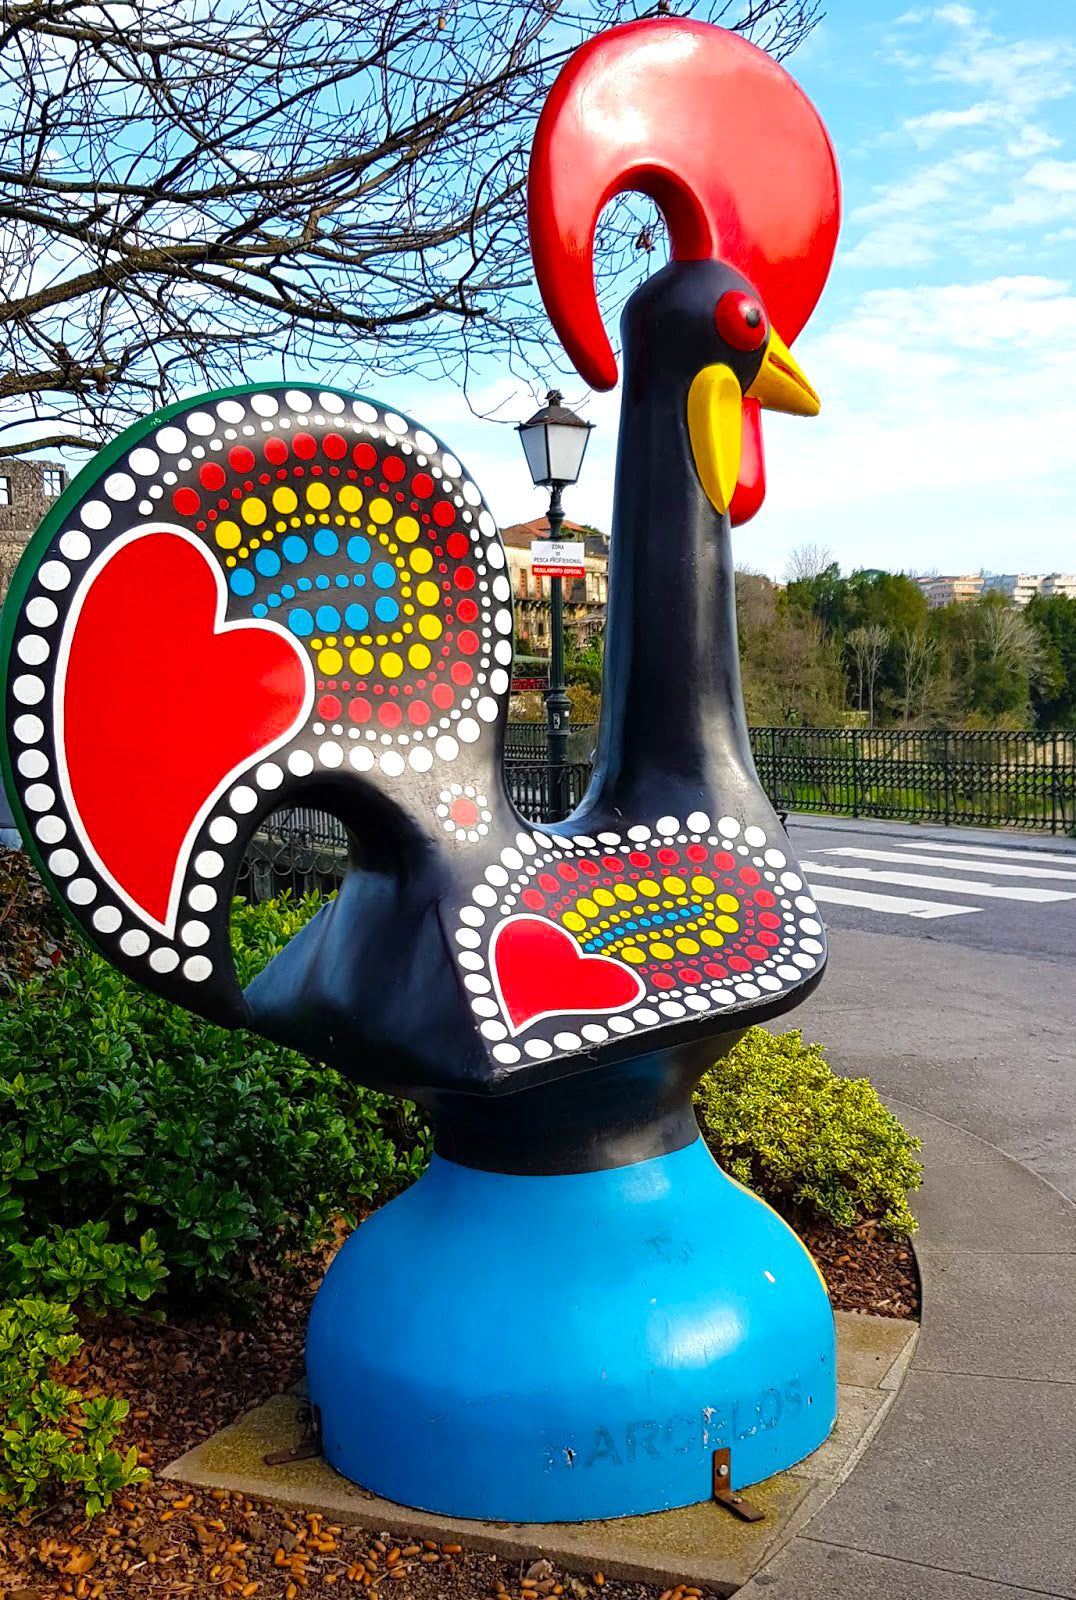 The Traditional Portuguese Rooster commonly known as Galo de Barcelos is a symbol of Portugal.